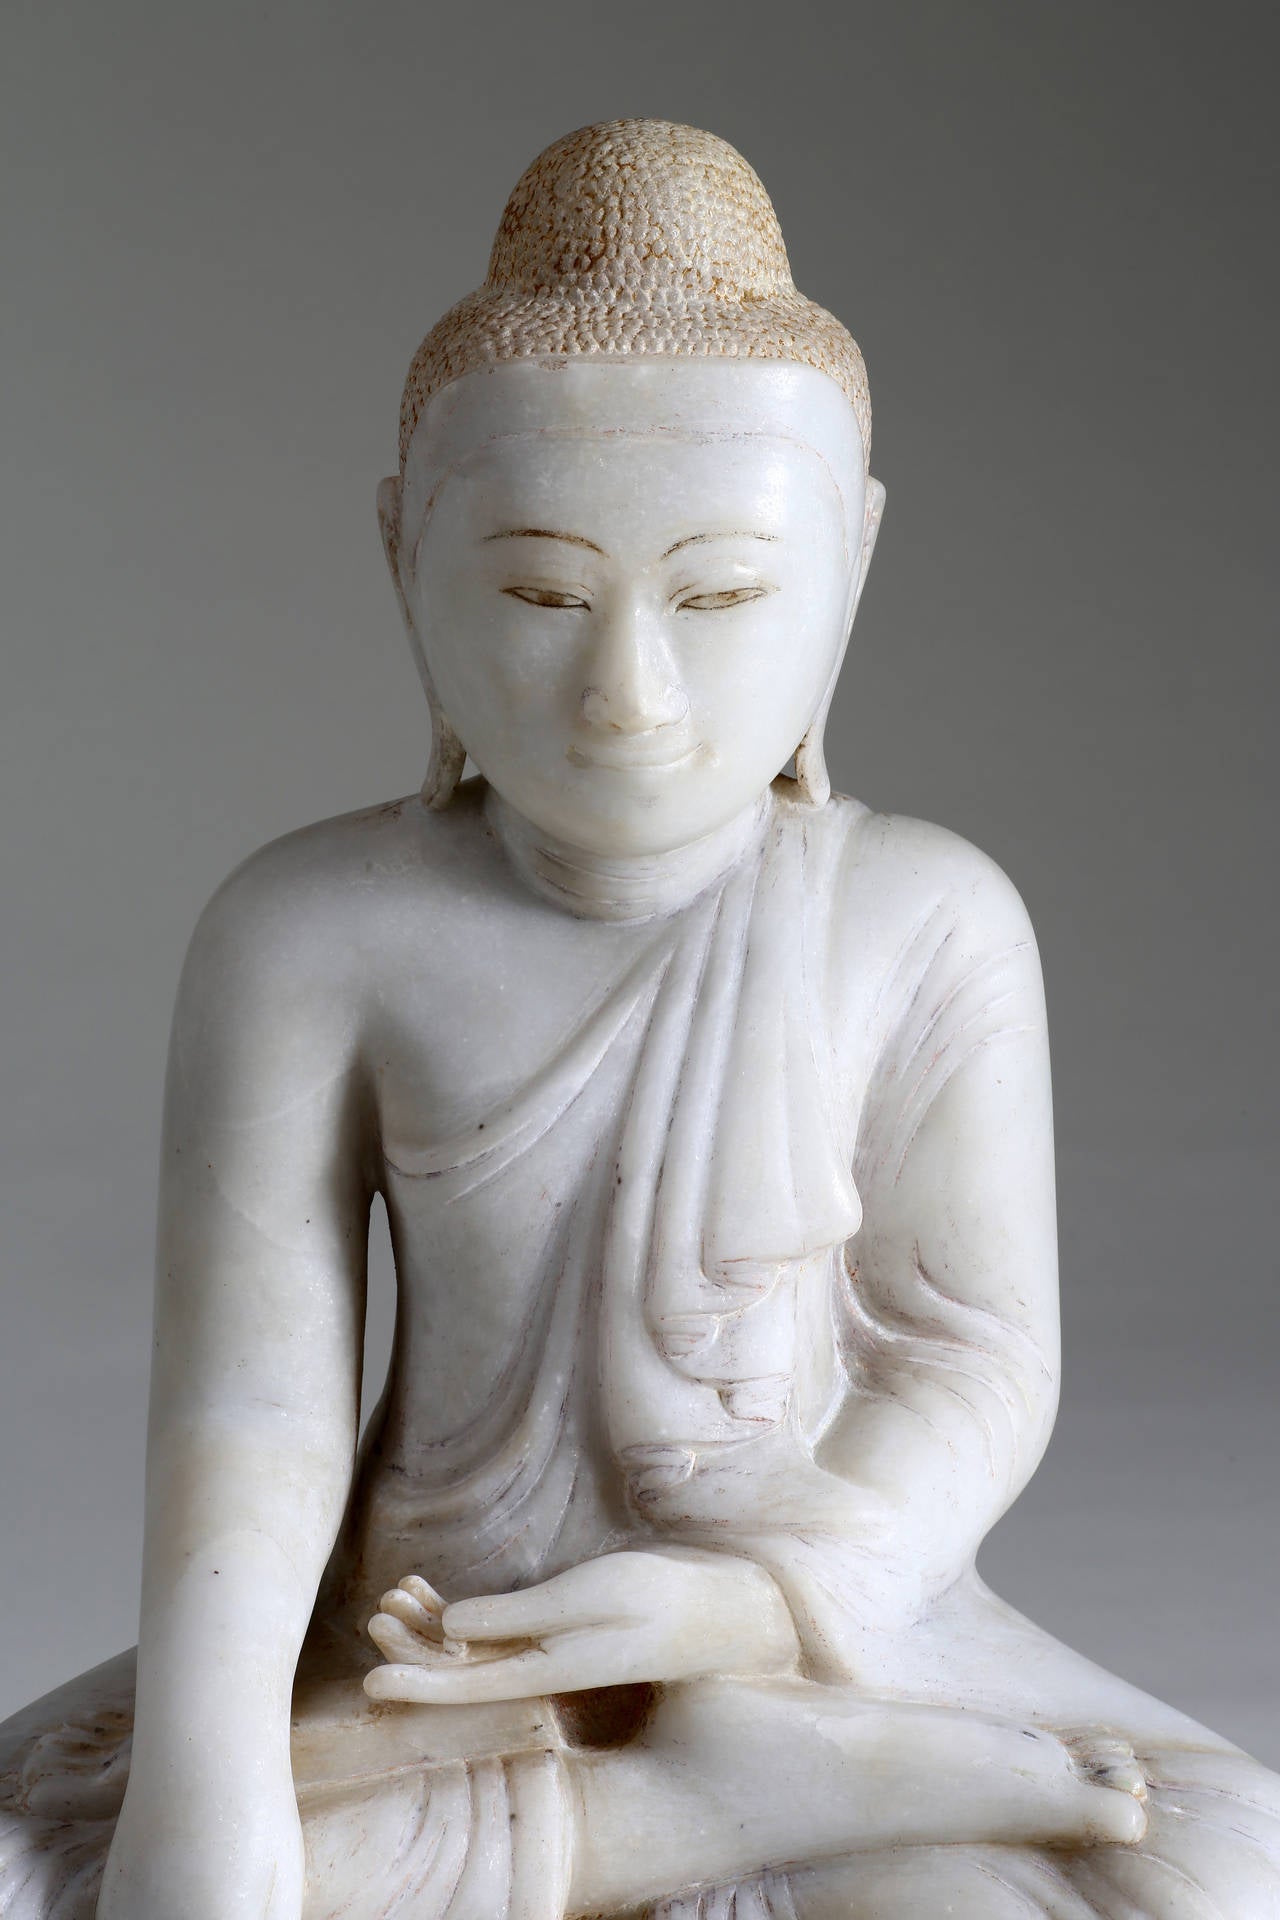 The Buddha is seated on a low base in vajrasana with the right hand in bhumisparsa mudra (the finger-tips touching the earth to symbolize the moment of enlightenment & calling the earth to witness) and the left hand in dhyana mudra (meditation).